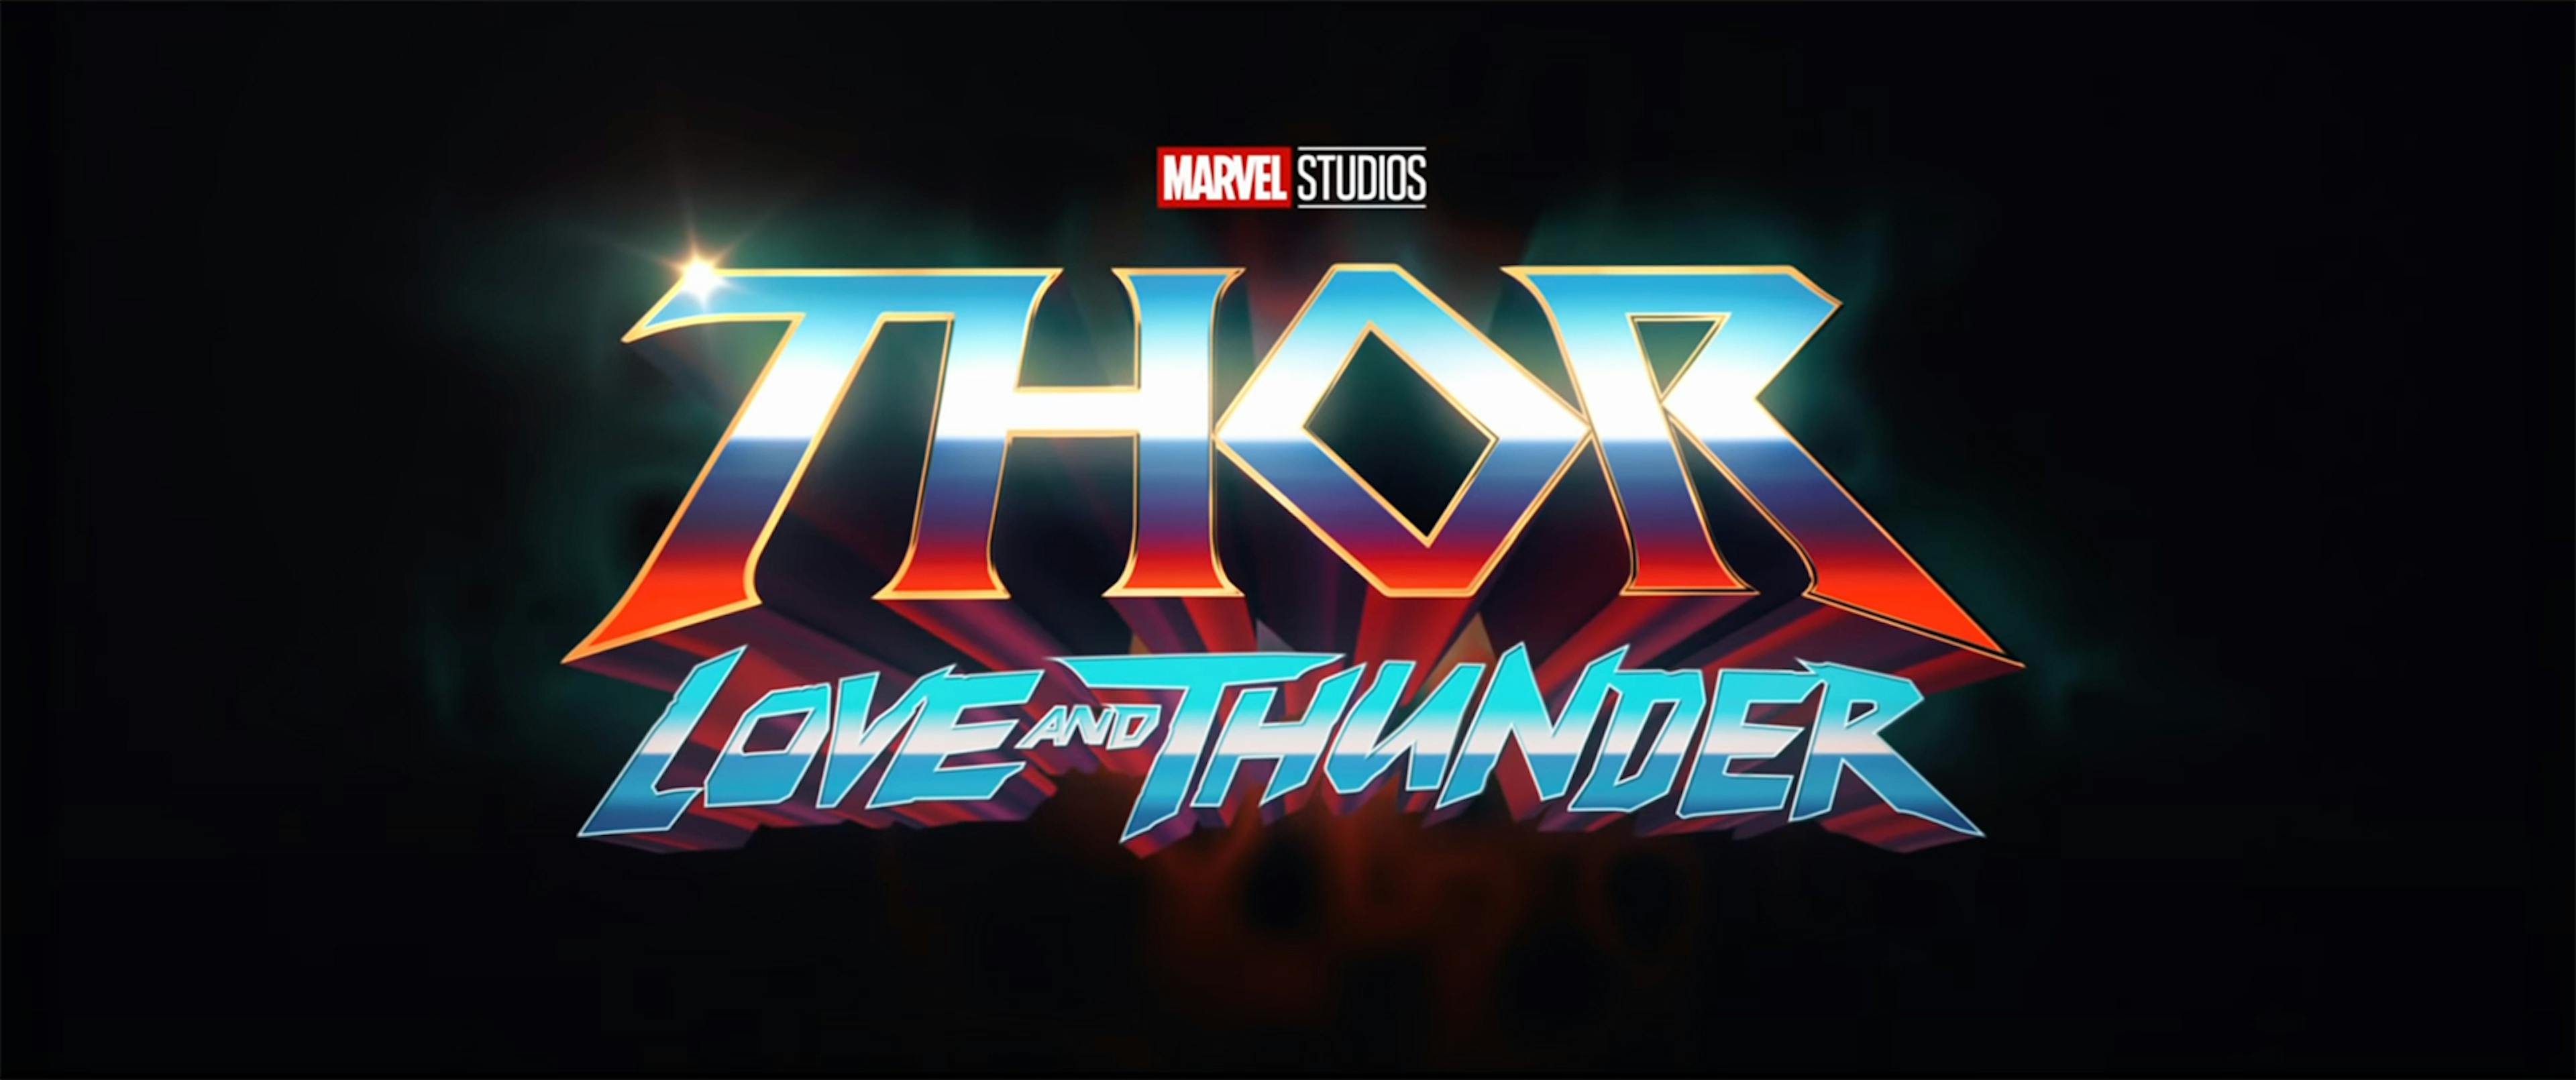 https://thewaltdisneycompany.com/marvel-studios-unveils-first-glimpse-of-the-cosmic-adventure-thor-love-and-thunder/